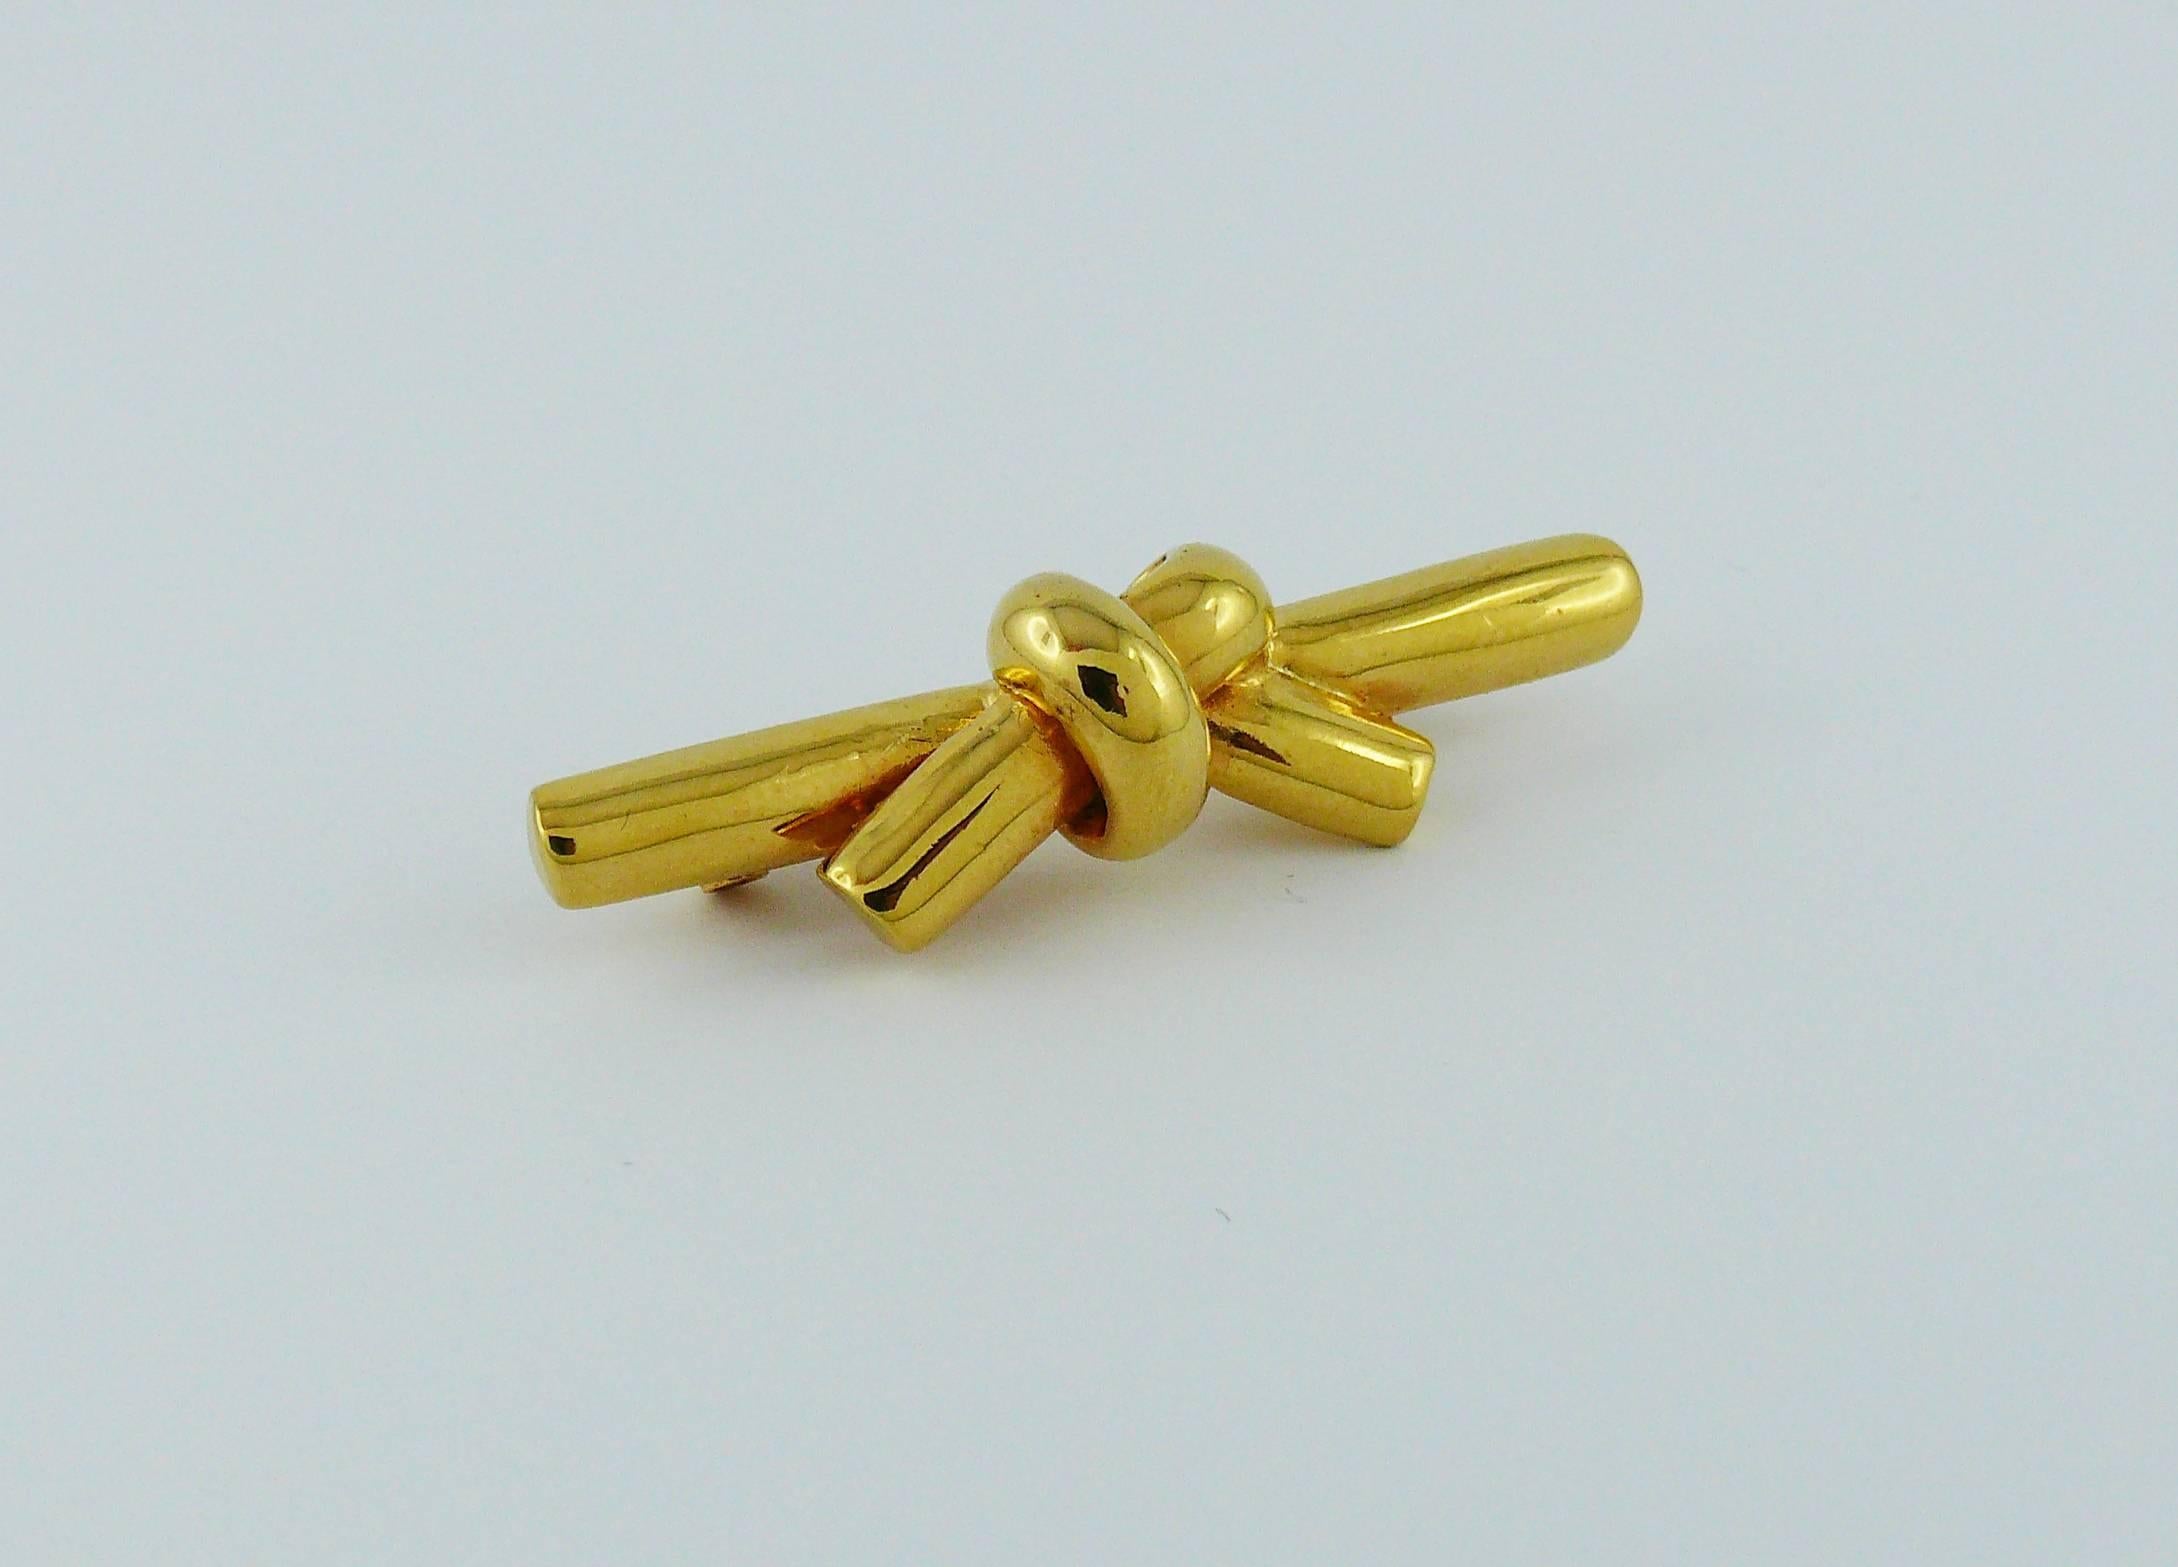 LANVIN Paris vintage gold toned knot bar brooch.

Embossed LANVIN Paris.

Indicative measurements : length approx. 5 cm (1.97 inches) /  max. width approx 1 cm (0.39 inch).

JEWELRY CONDITION CHART
- New or never worn : item is in pristine condition